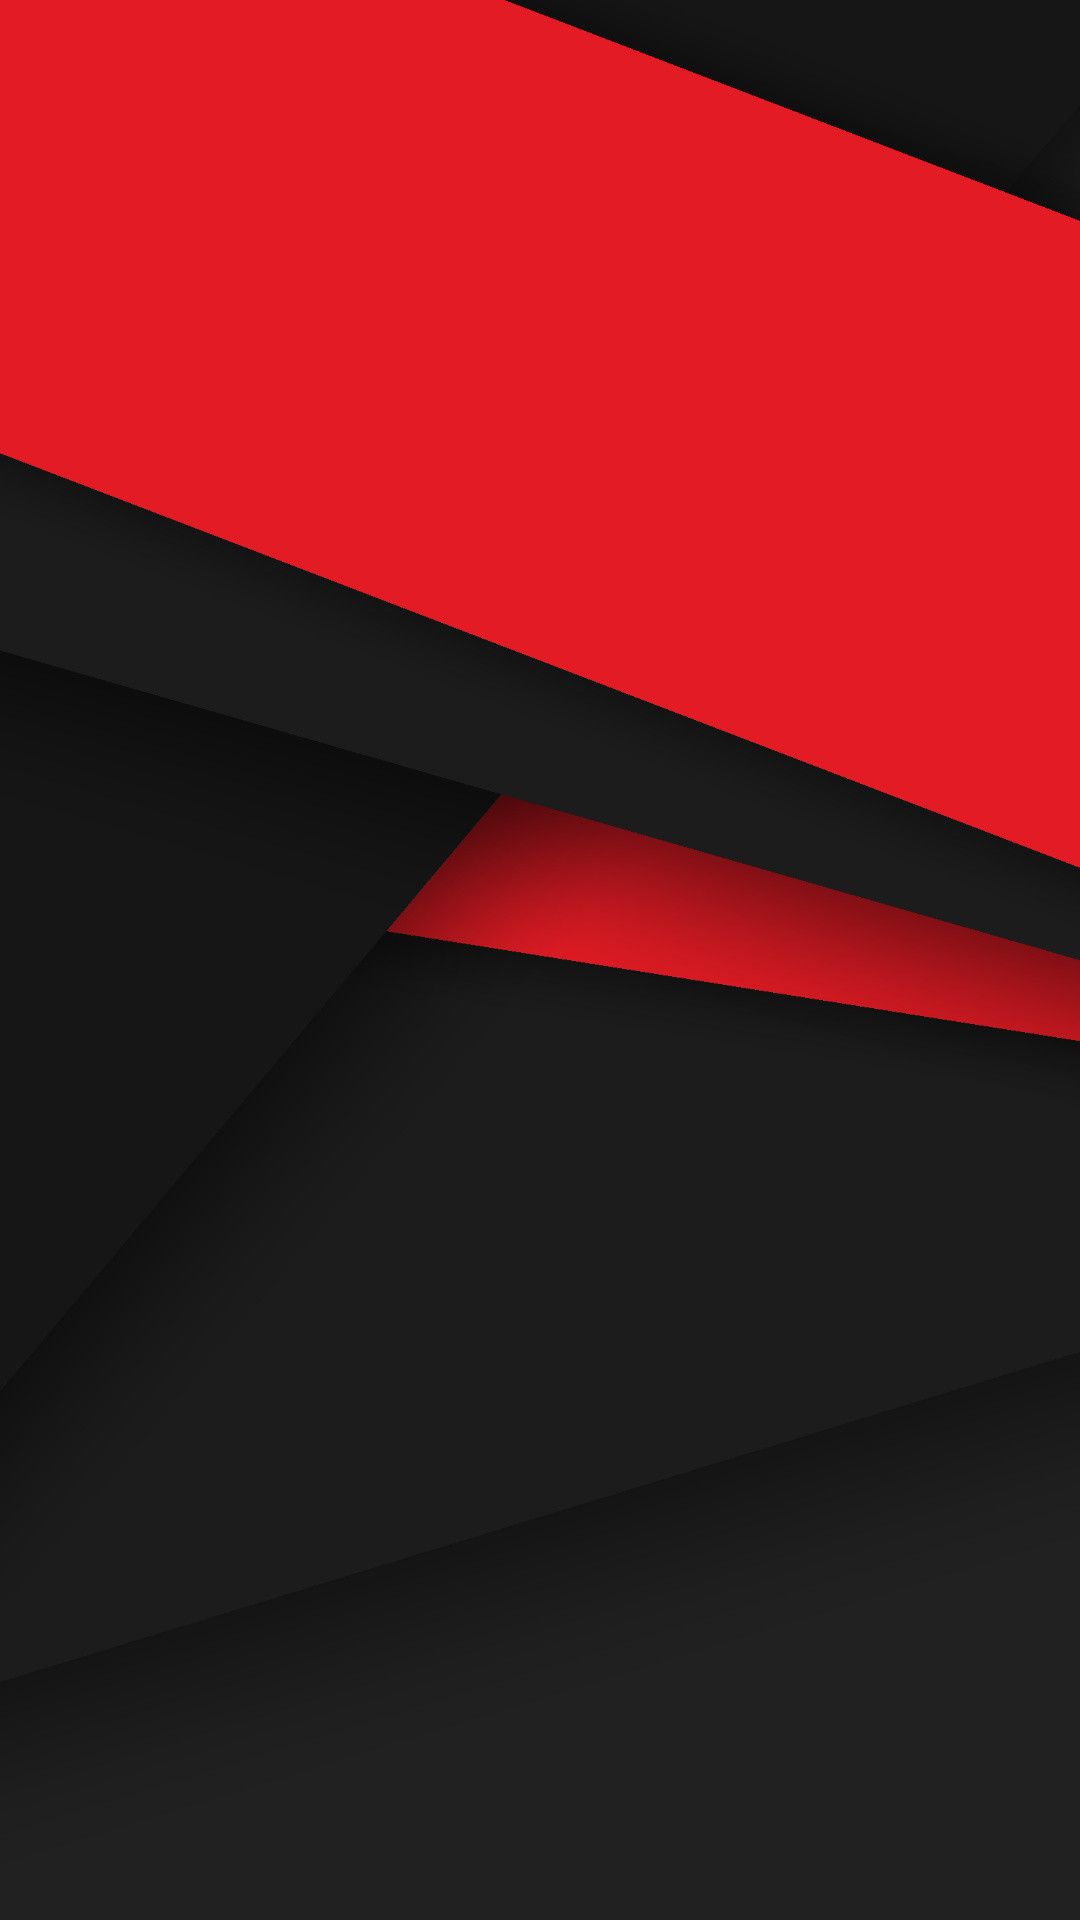 1080x Red And Black Material Design Mobile HD And Red